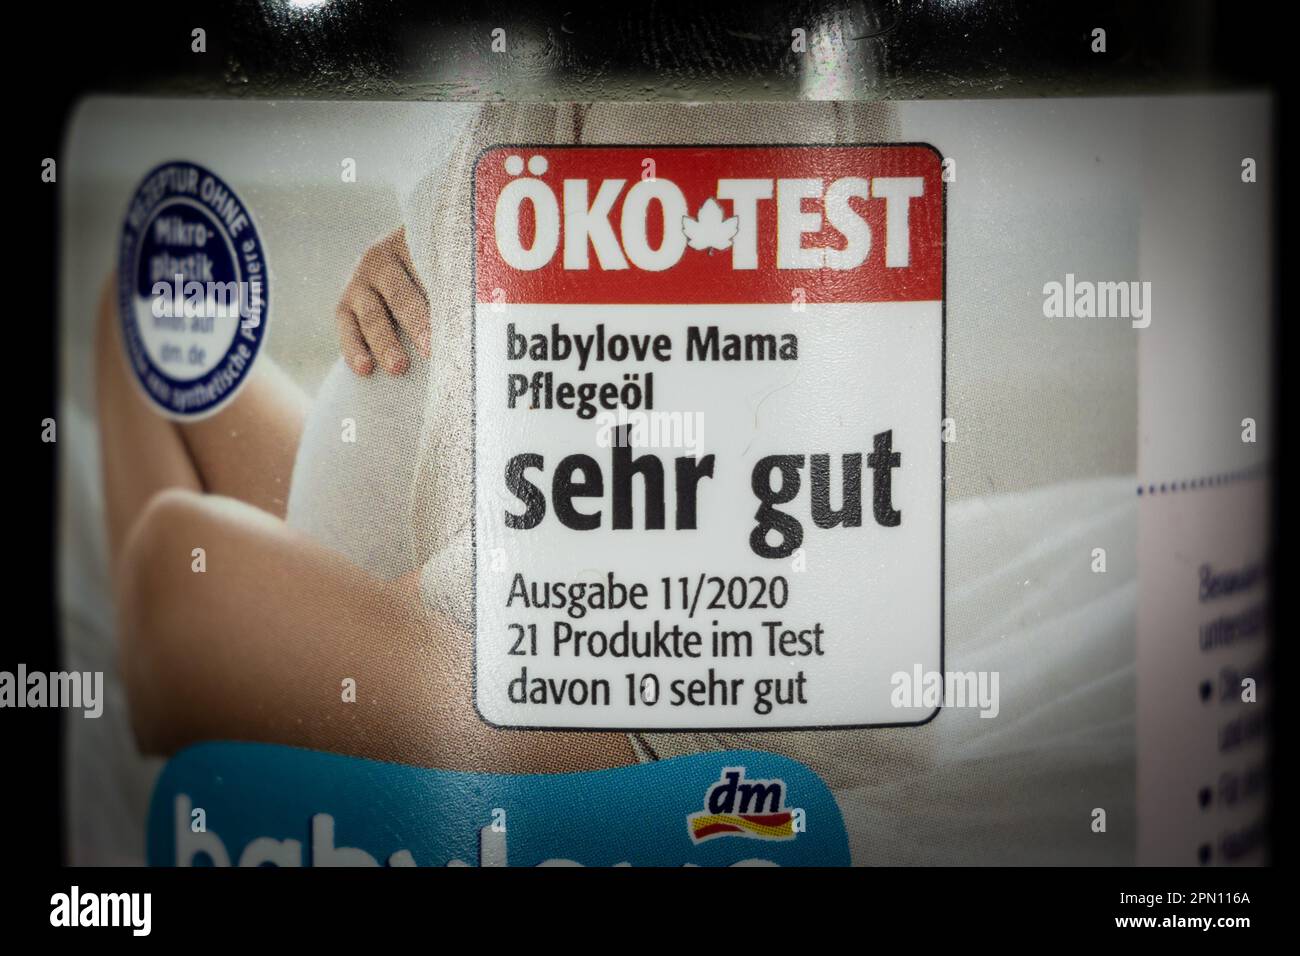 Picture of a label with the oko test logo indicating the product, a cosmetic oil, has been ranked very good (sehr gut) by the magazine, taken in Dortm Stock Photo